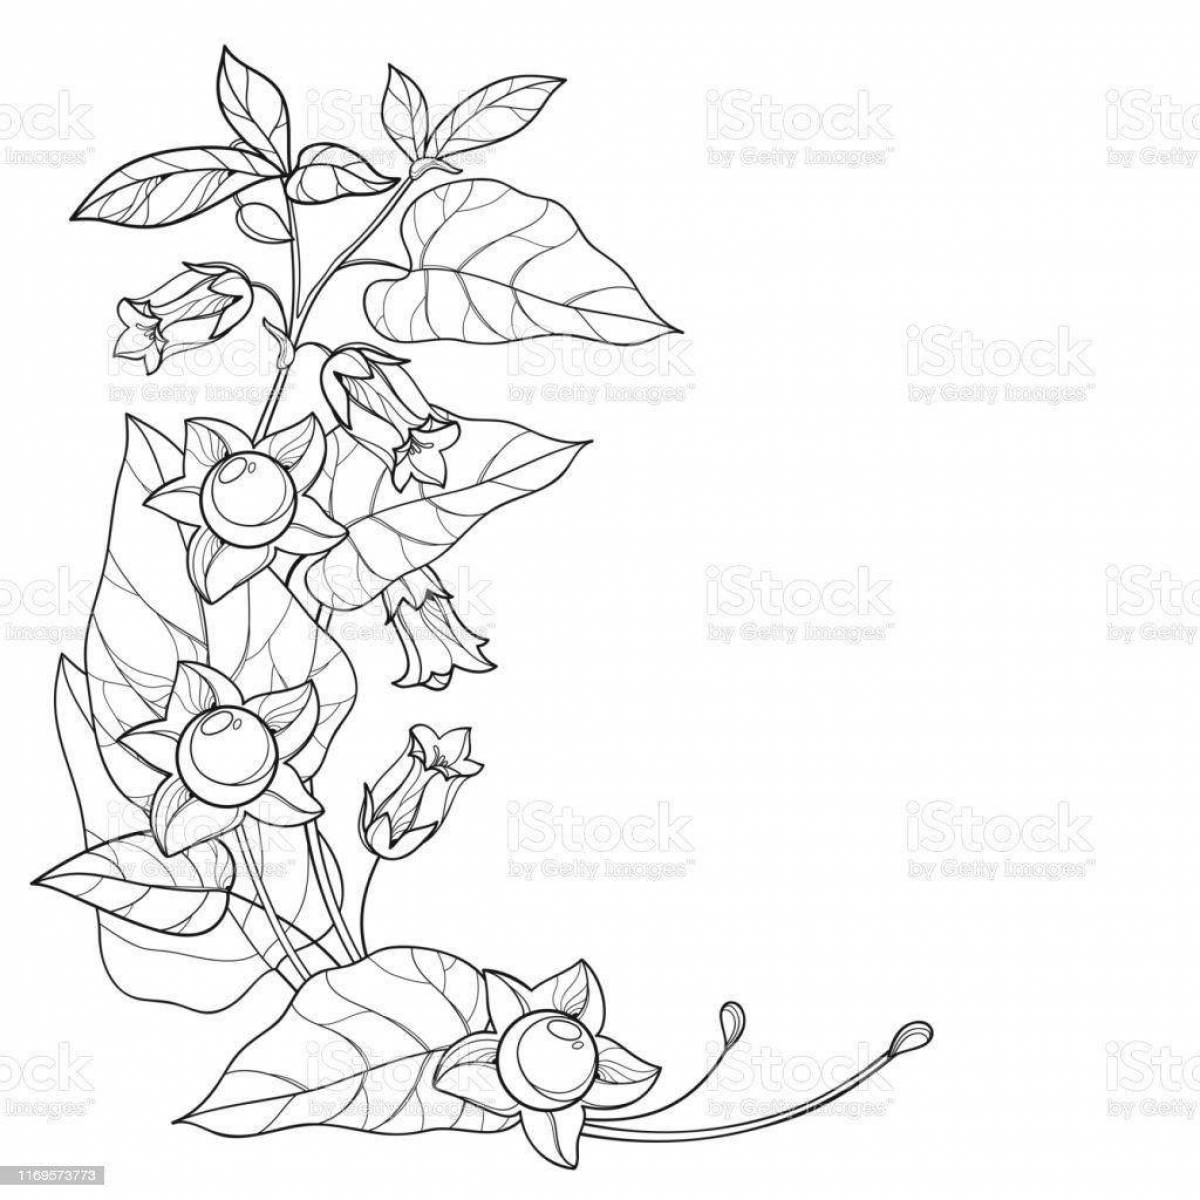 Exciting coloring pages of poisonous plants for kids